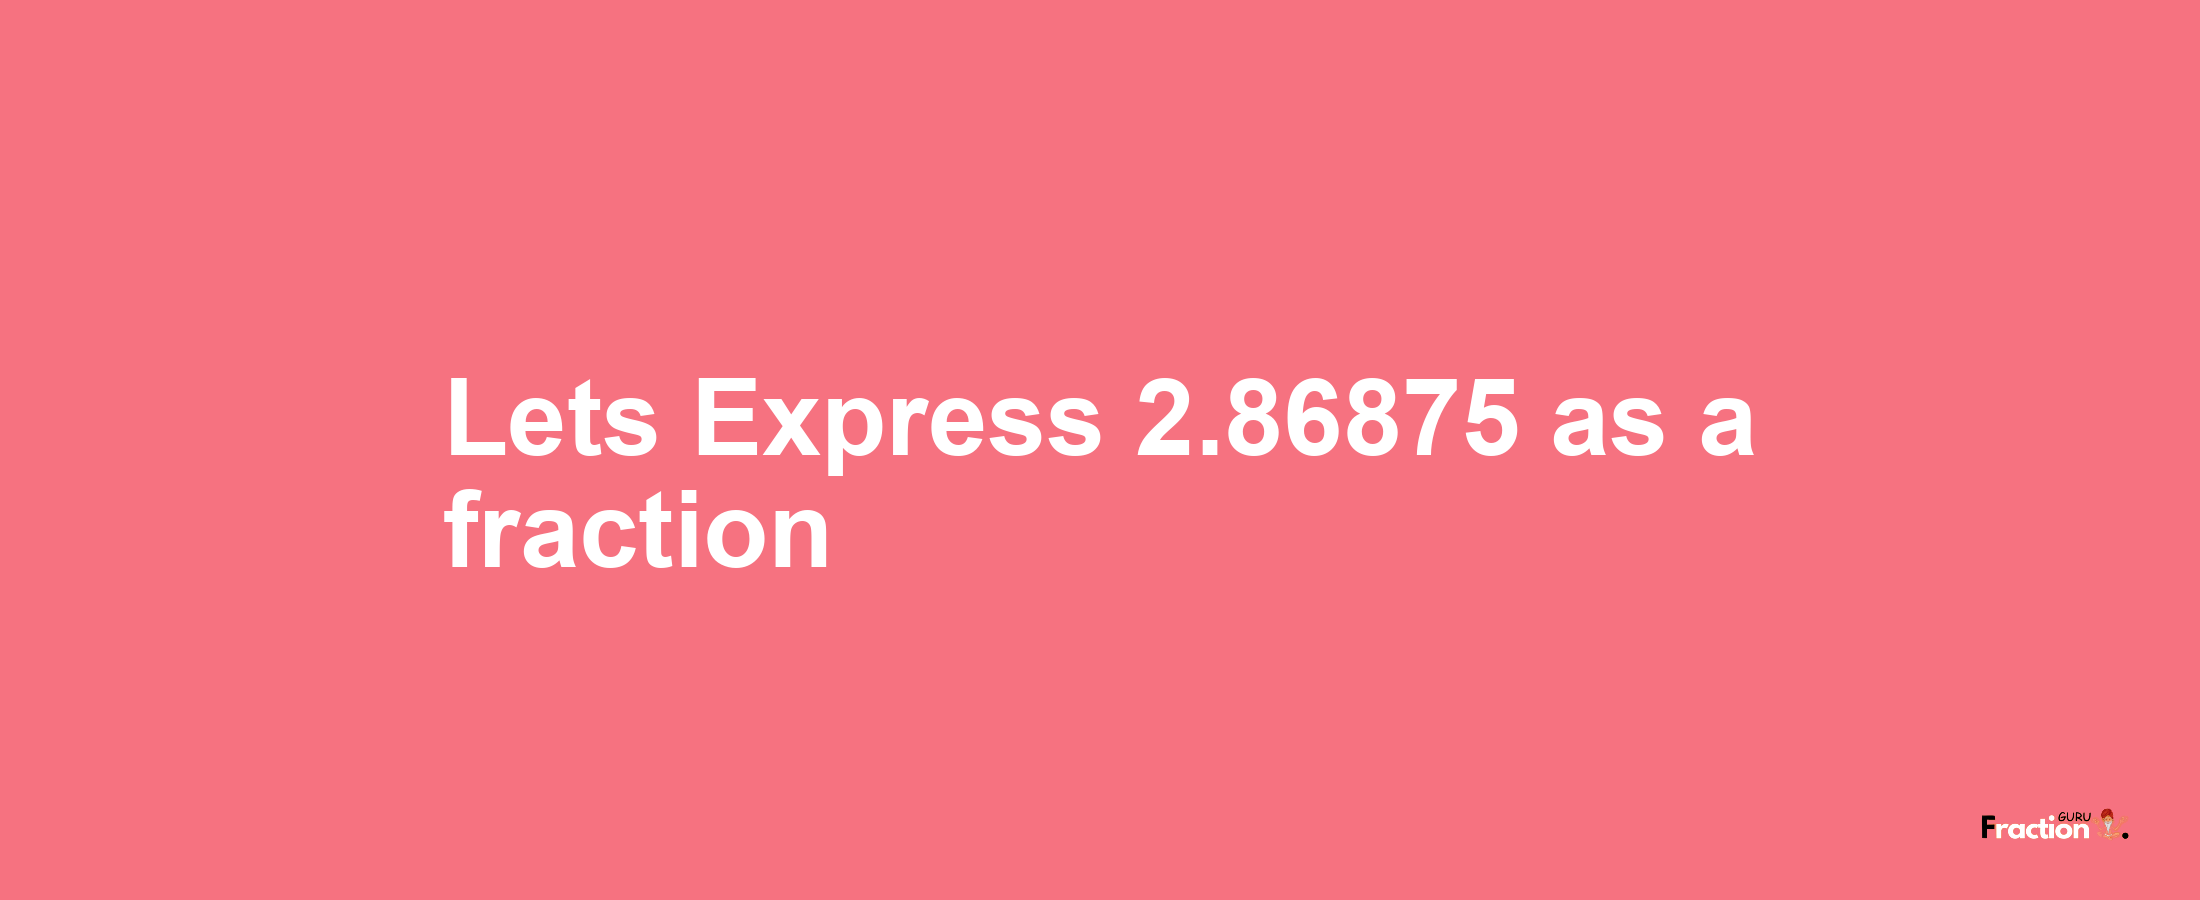 Lets Express 2.86875 as afraction